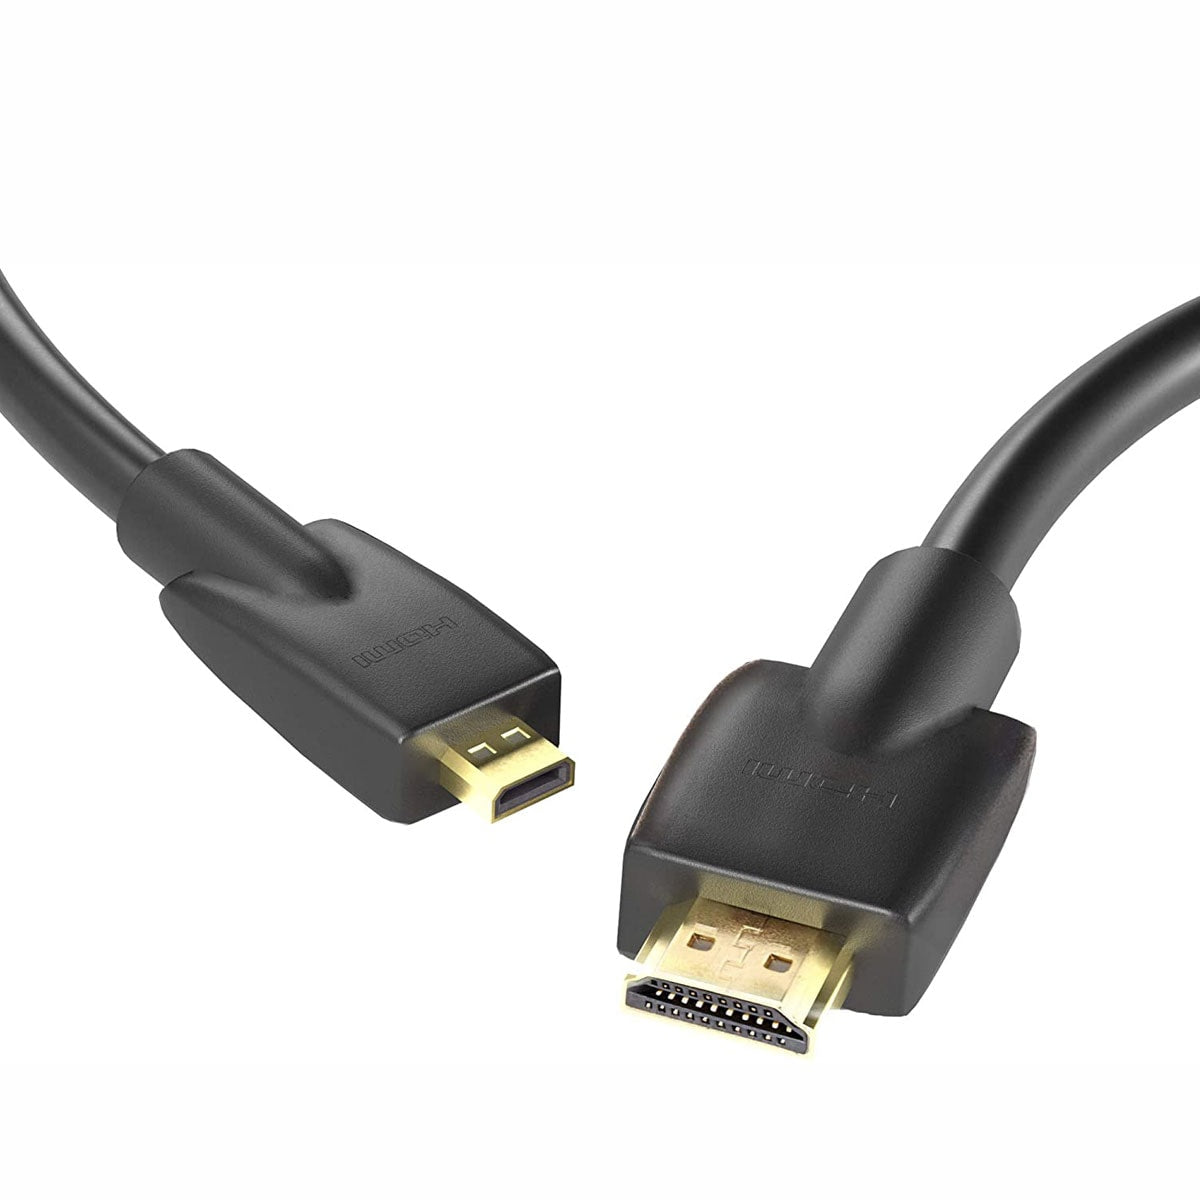  HDMI cable (micro to normal plug, 2 m)